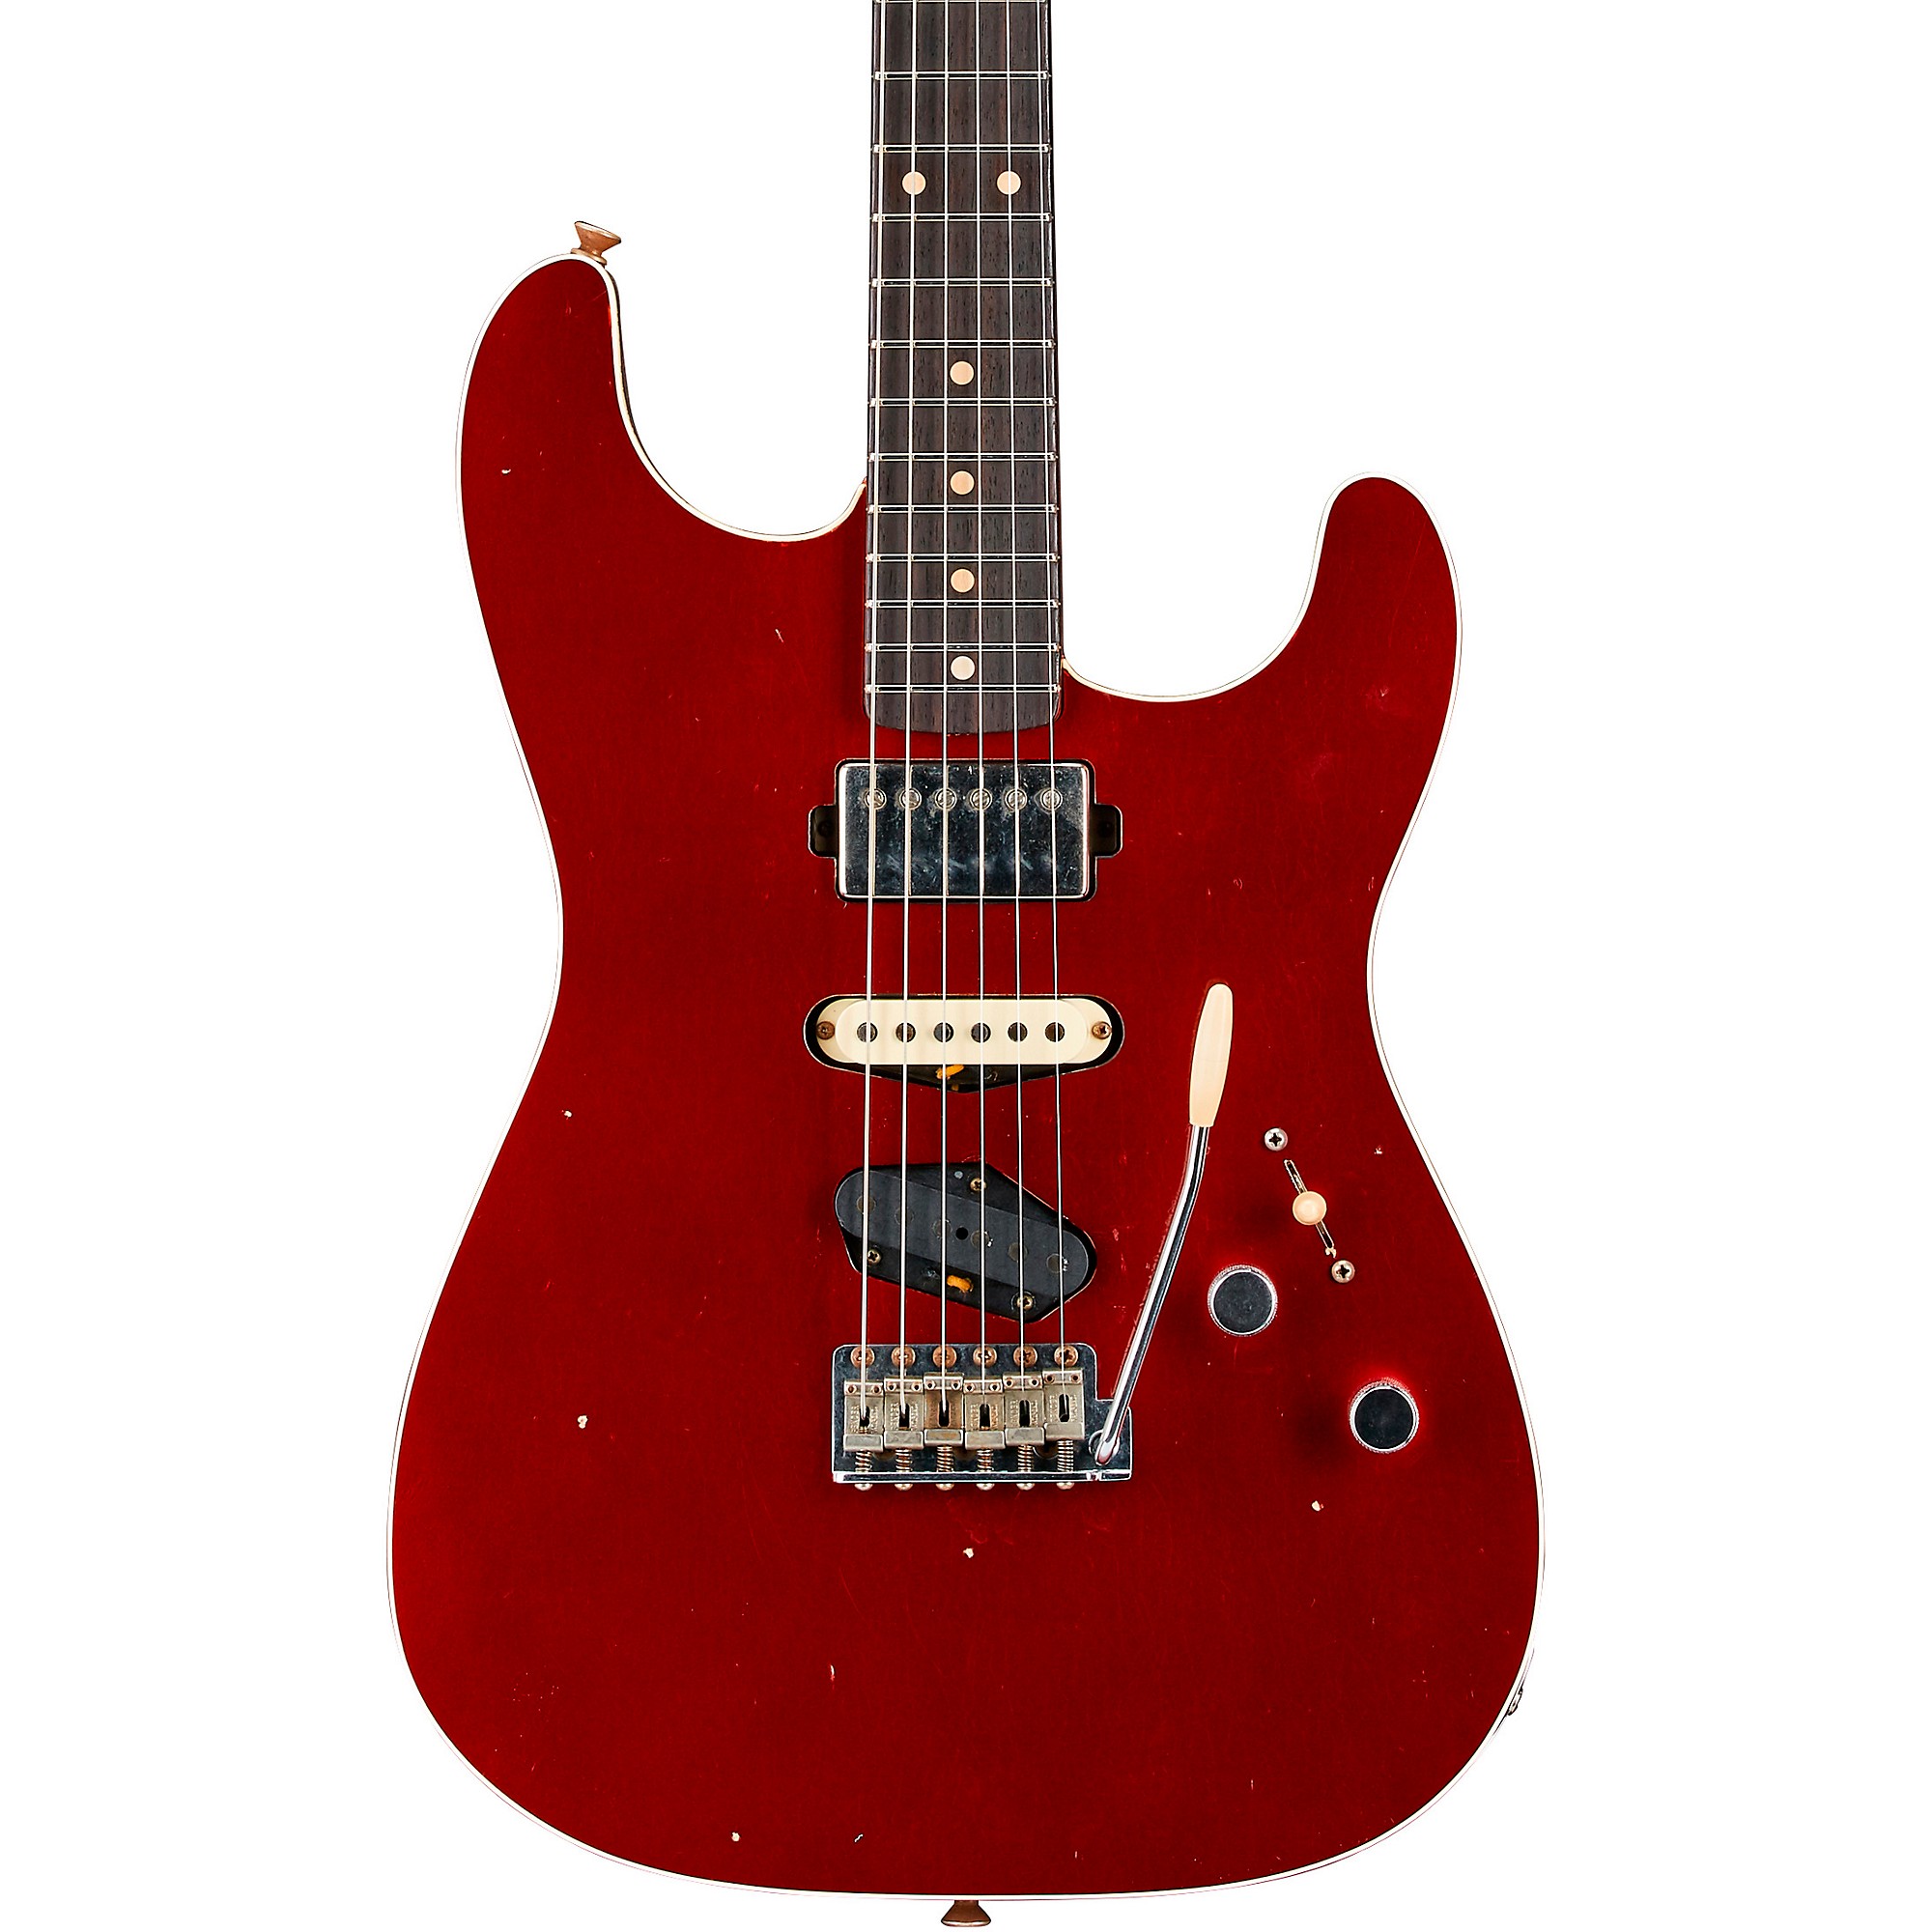 Fender Custom Shop Дилер Select Stratocaster HST Journeyman Электрогитара Aged Candy Apple Red дилер